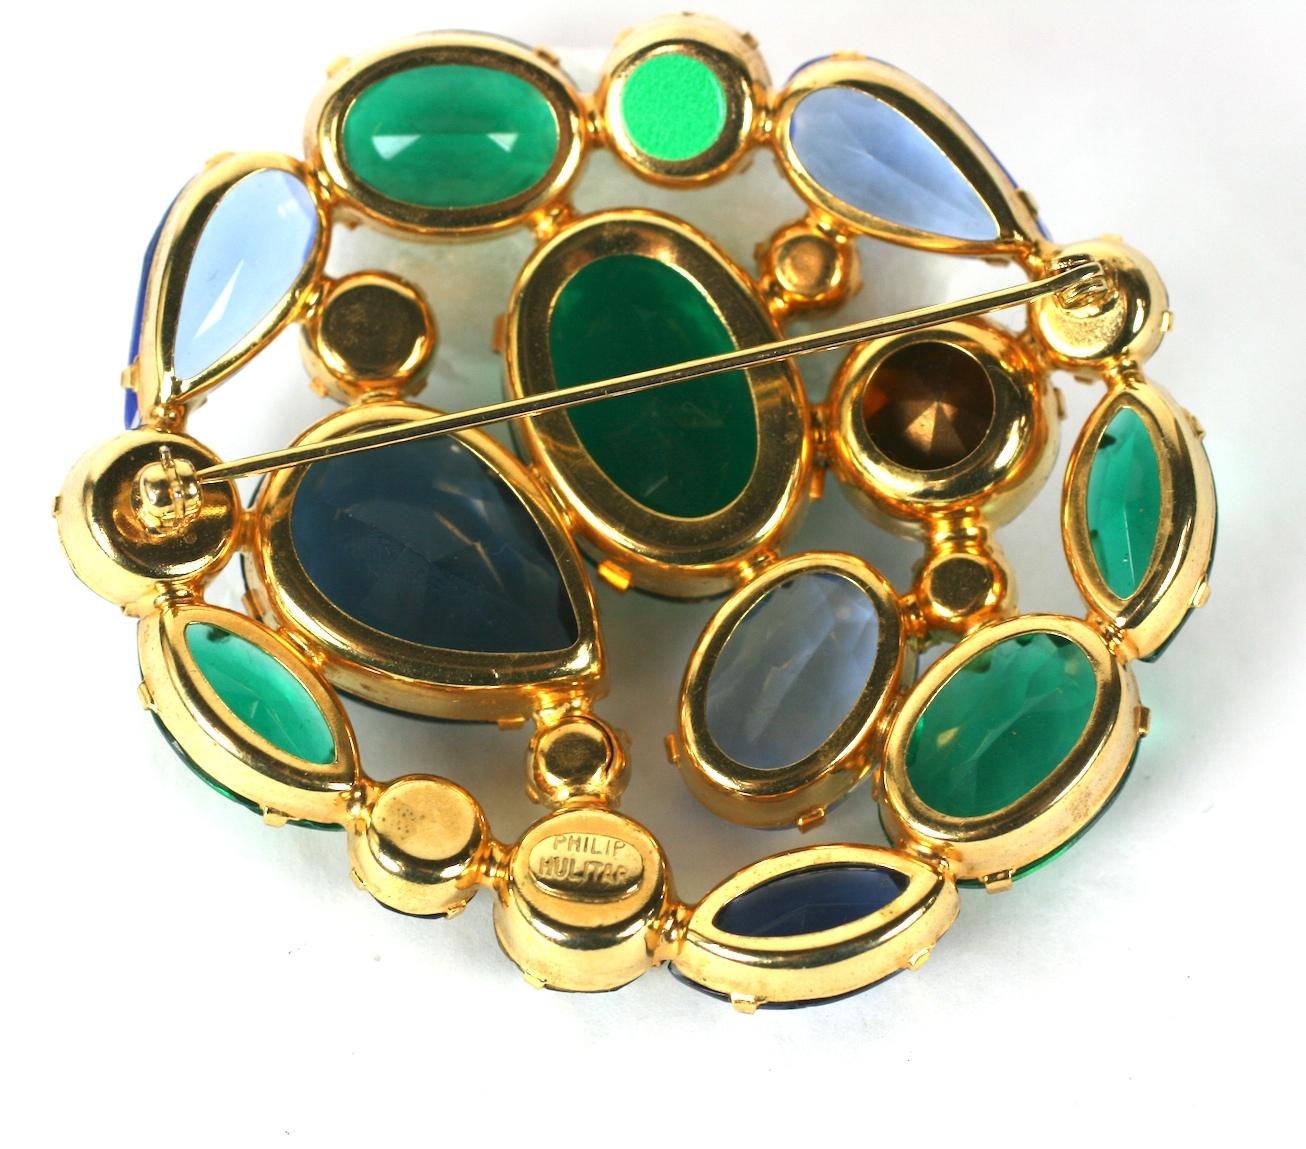  Philip Hulitar Jeweled Crystal Brooch  In Excellent Condition For Sale In New York, NY